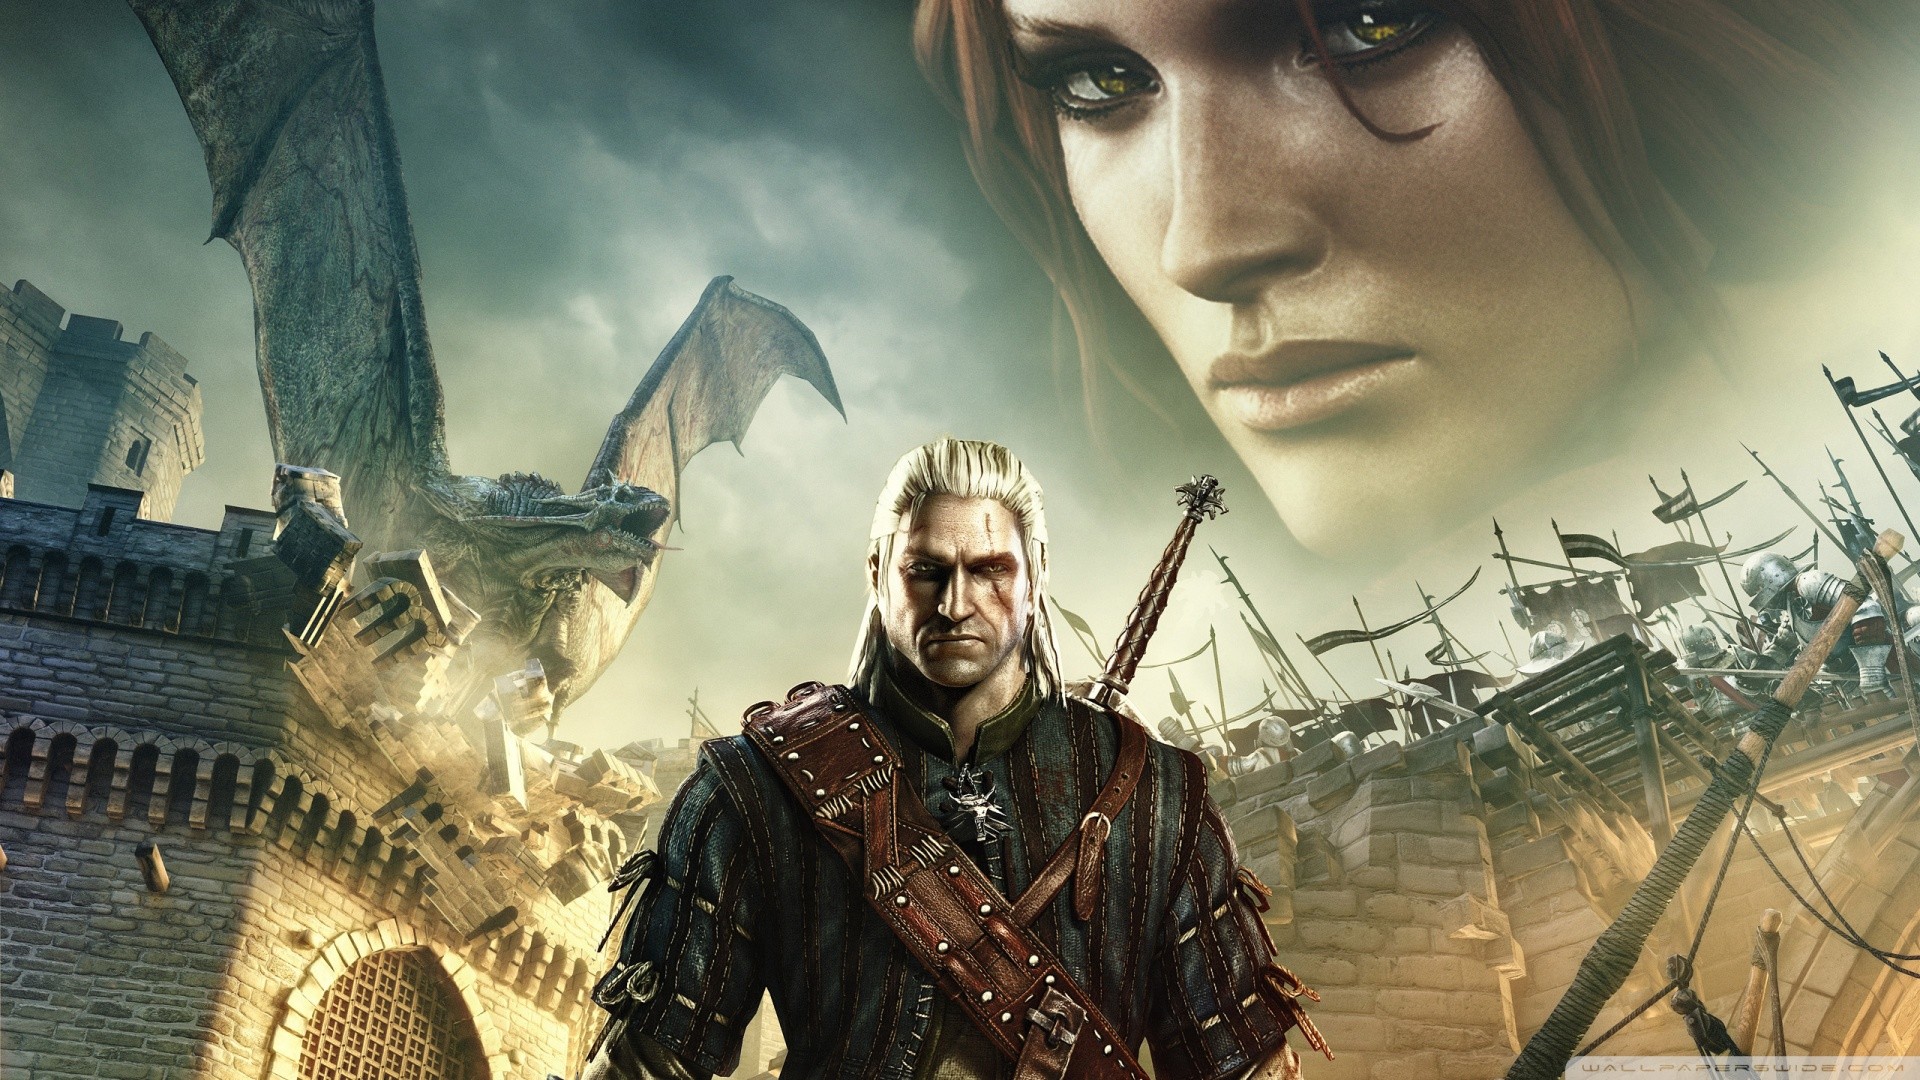 The Witcher Wild Hunt Movie Wallpaper With high-resolution 1920X1080 pixel. You can use this poster wallpaper for your Desktop Computers, Mac Screensavers, Windows Backgrounds, iPhone Wallpapers, Tablet or Android Lock screen and another Mobile device